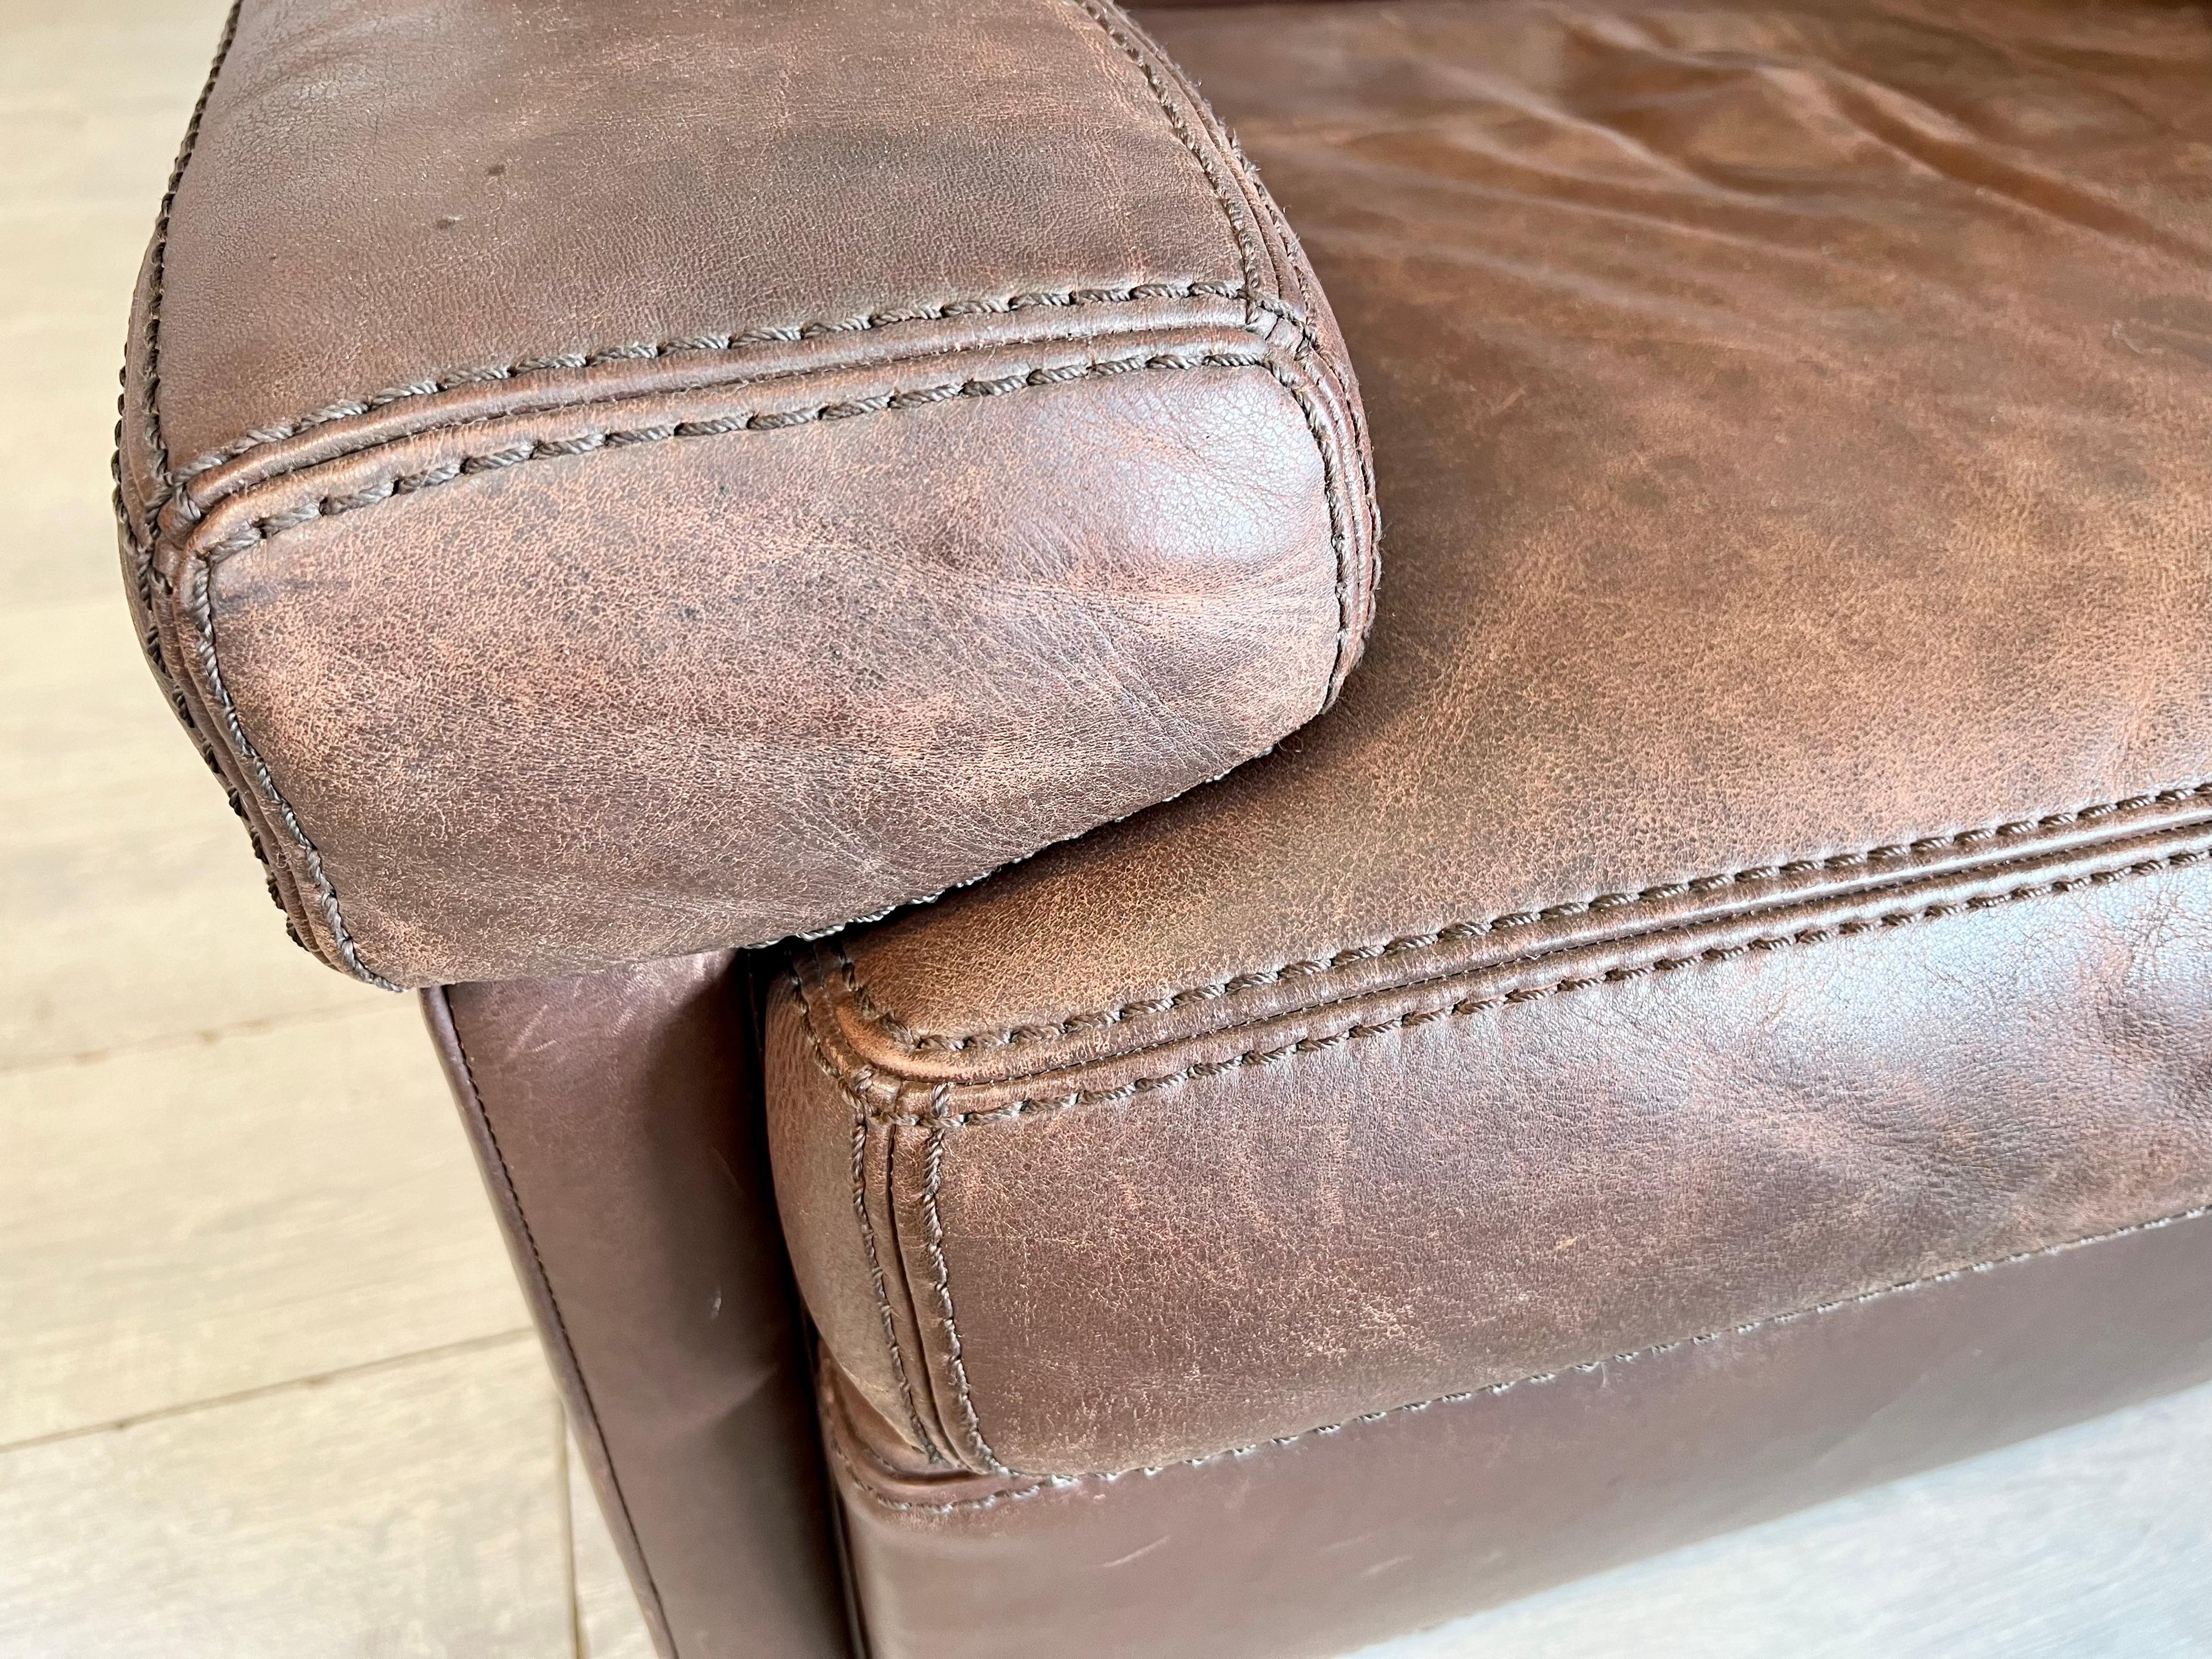 Original Vintage Modern Leather Armchairs by Durlet, Belgium, 1970s - a Pair In Good Condition For Sale In Bridgeport, CT